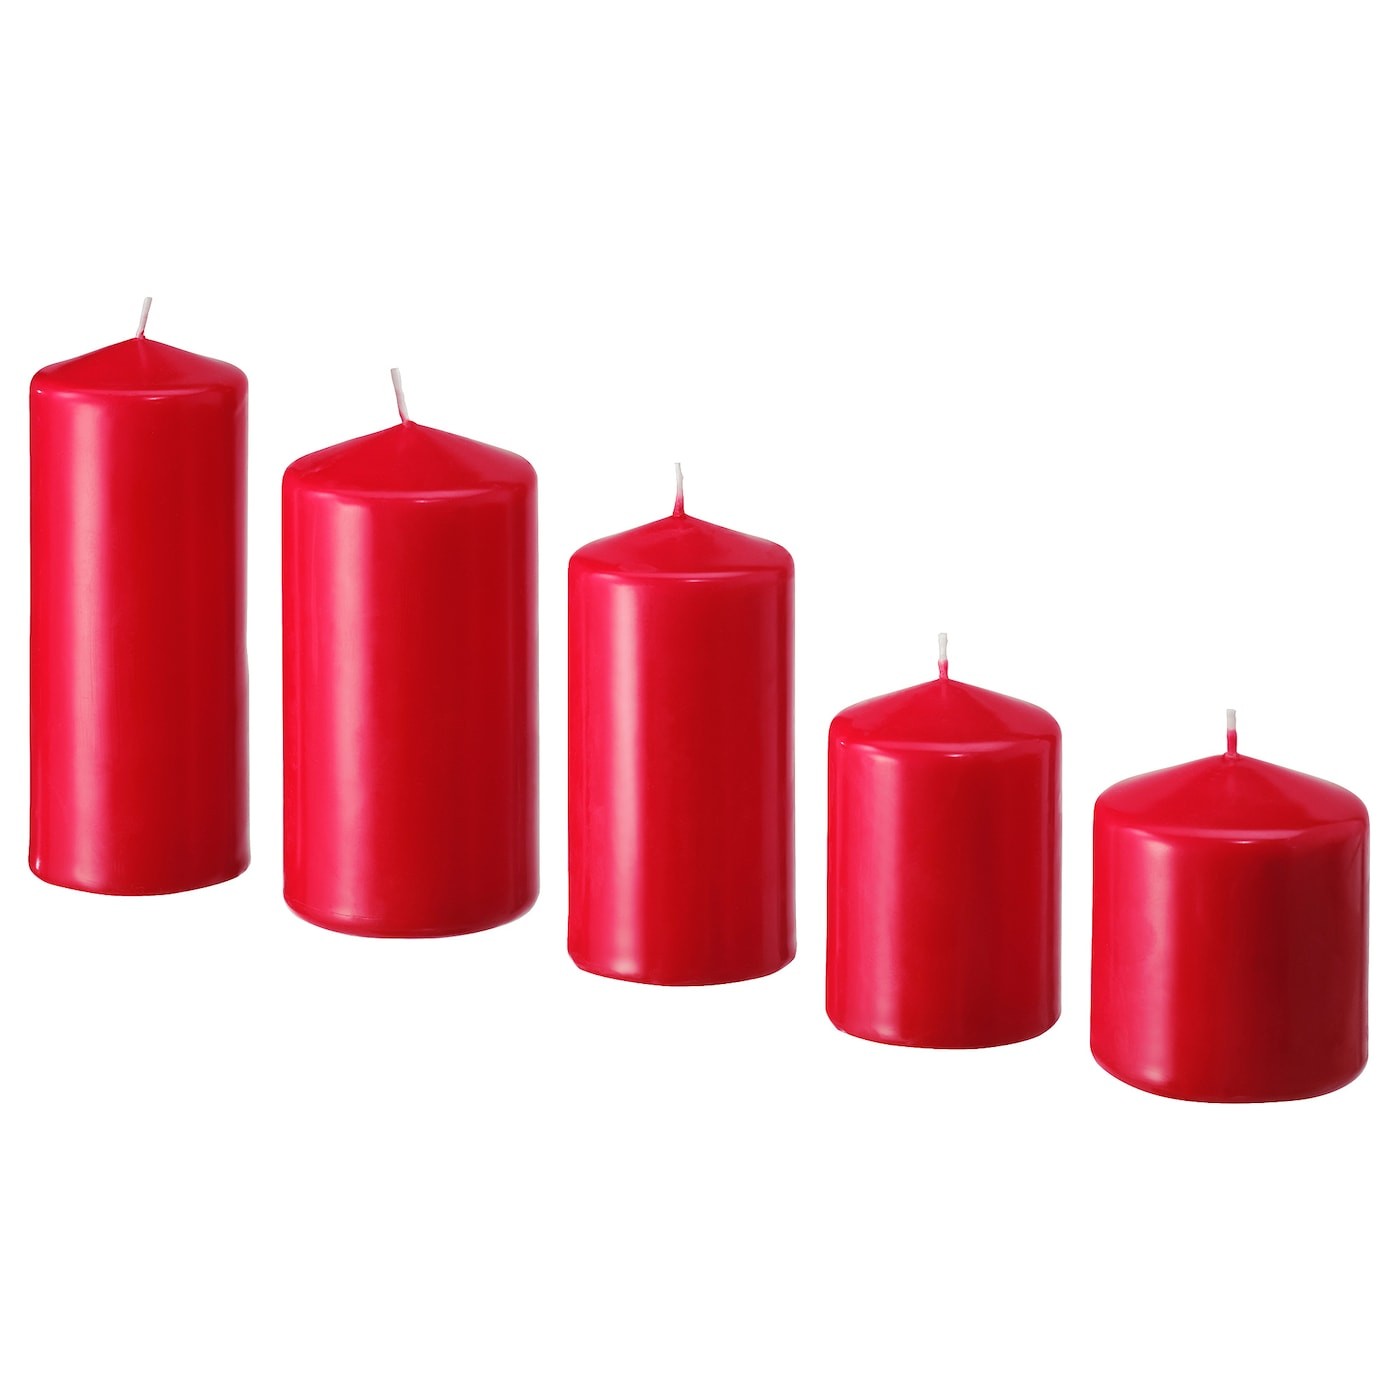 FENOMEN Unscented block candle, set of 5